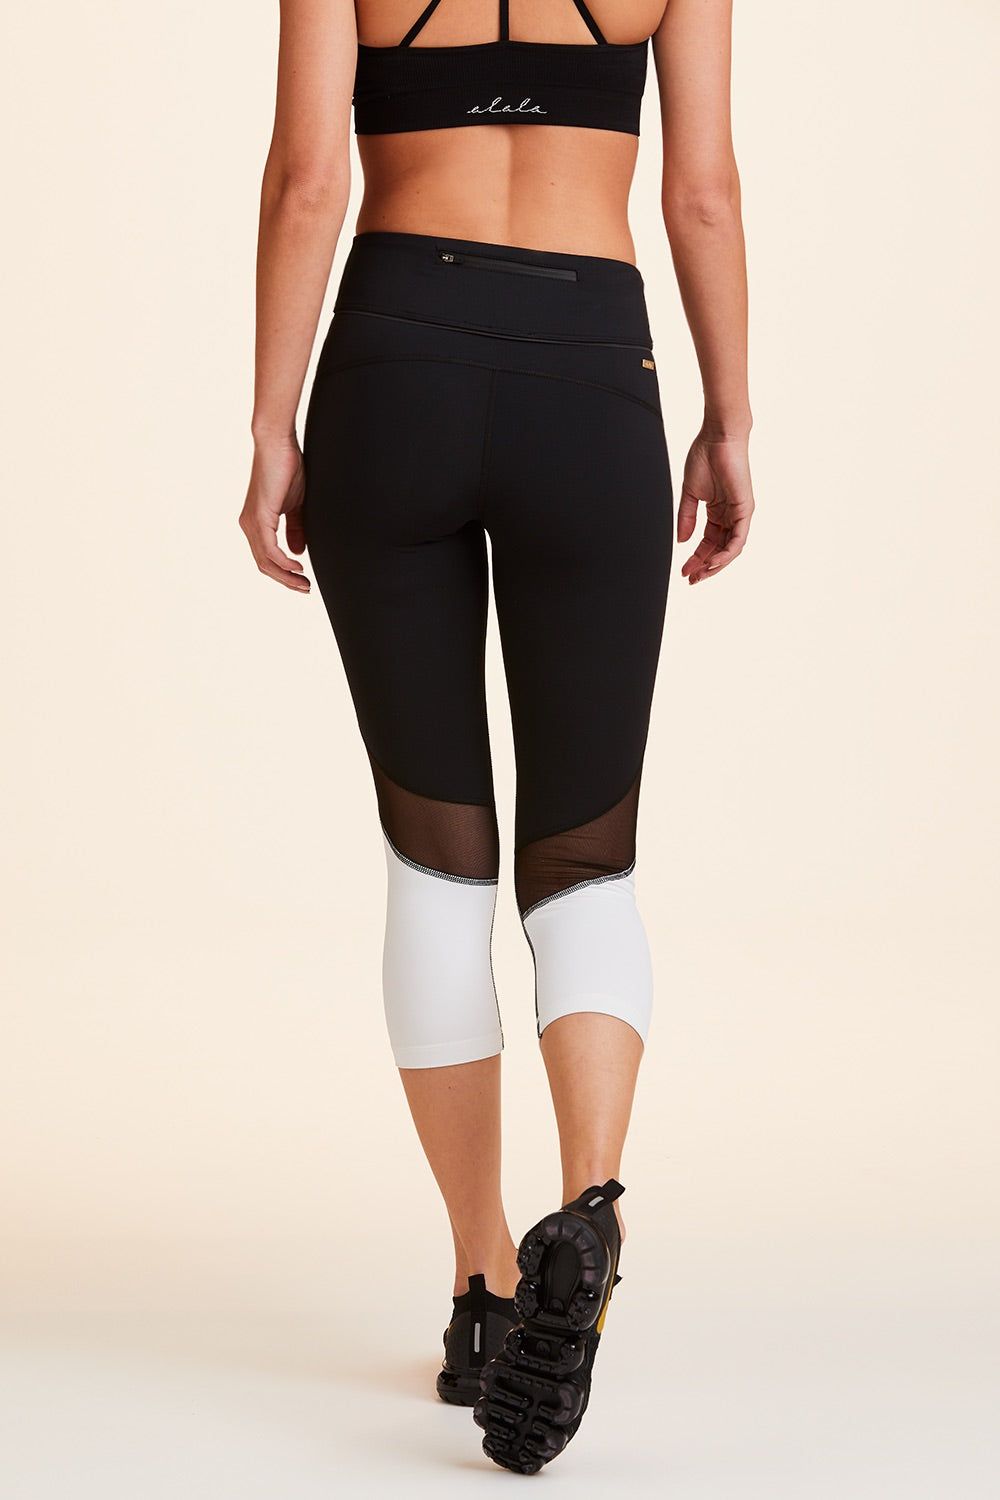 Back view of Alala Women's Luxury Athleisure cropped black and white tight with mesh paneling on back of knees.